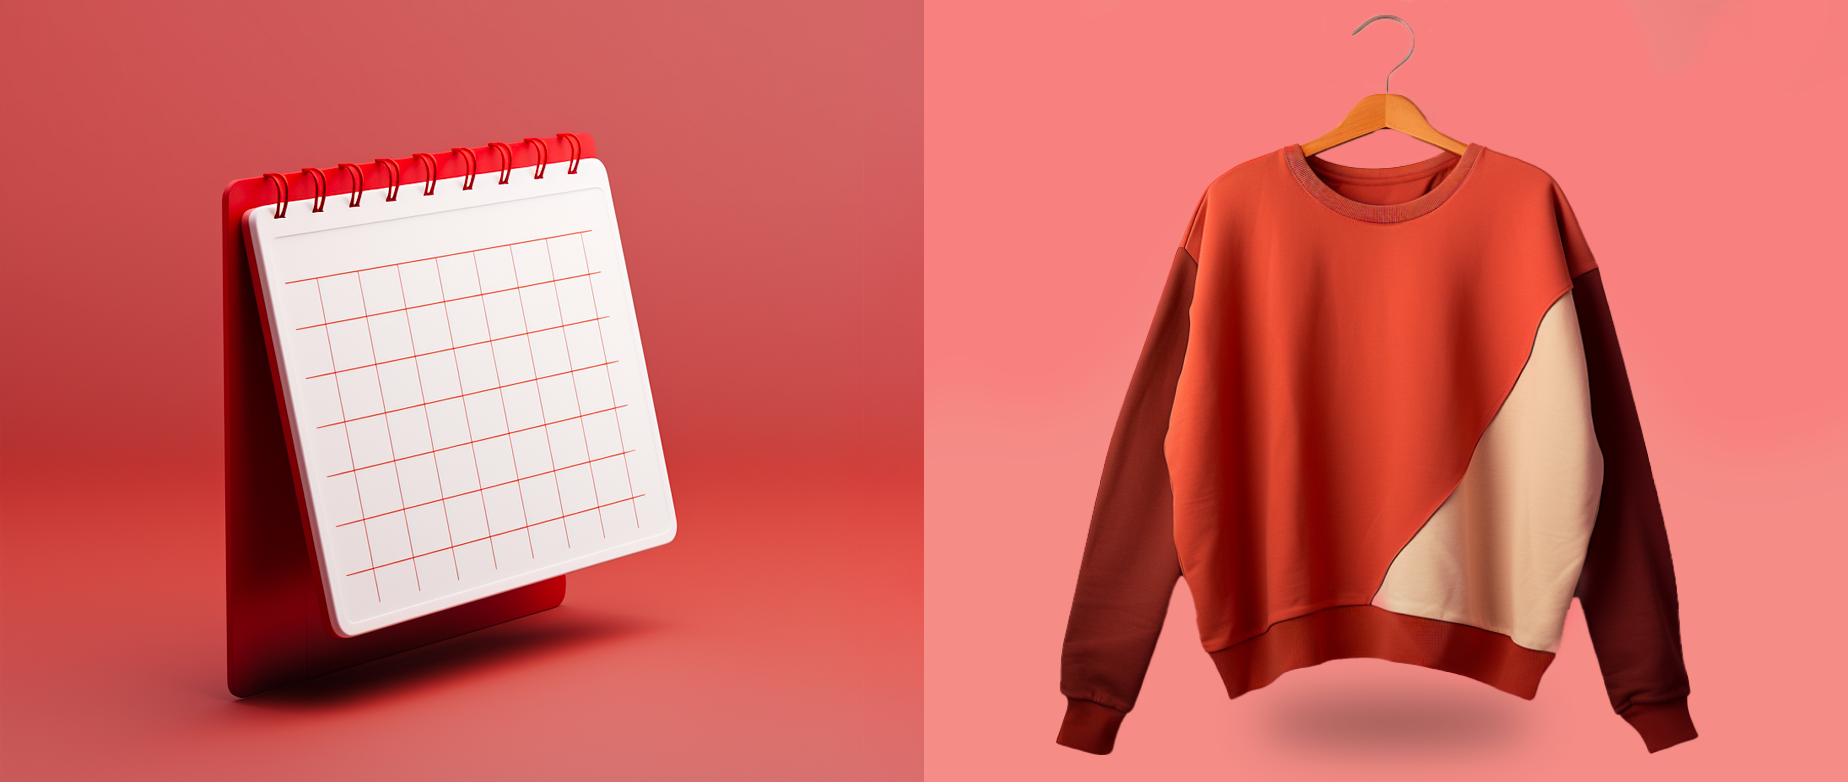 An empty planner on a dark red background next to a red sweatshirt on a light red background.